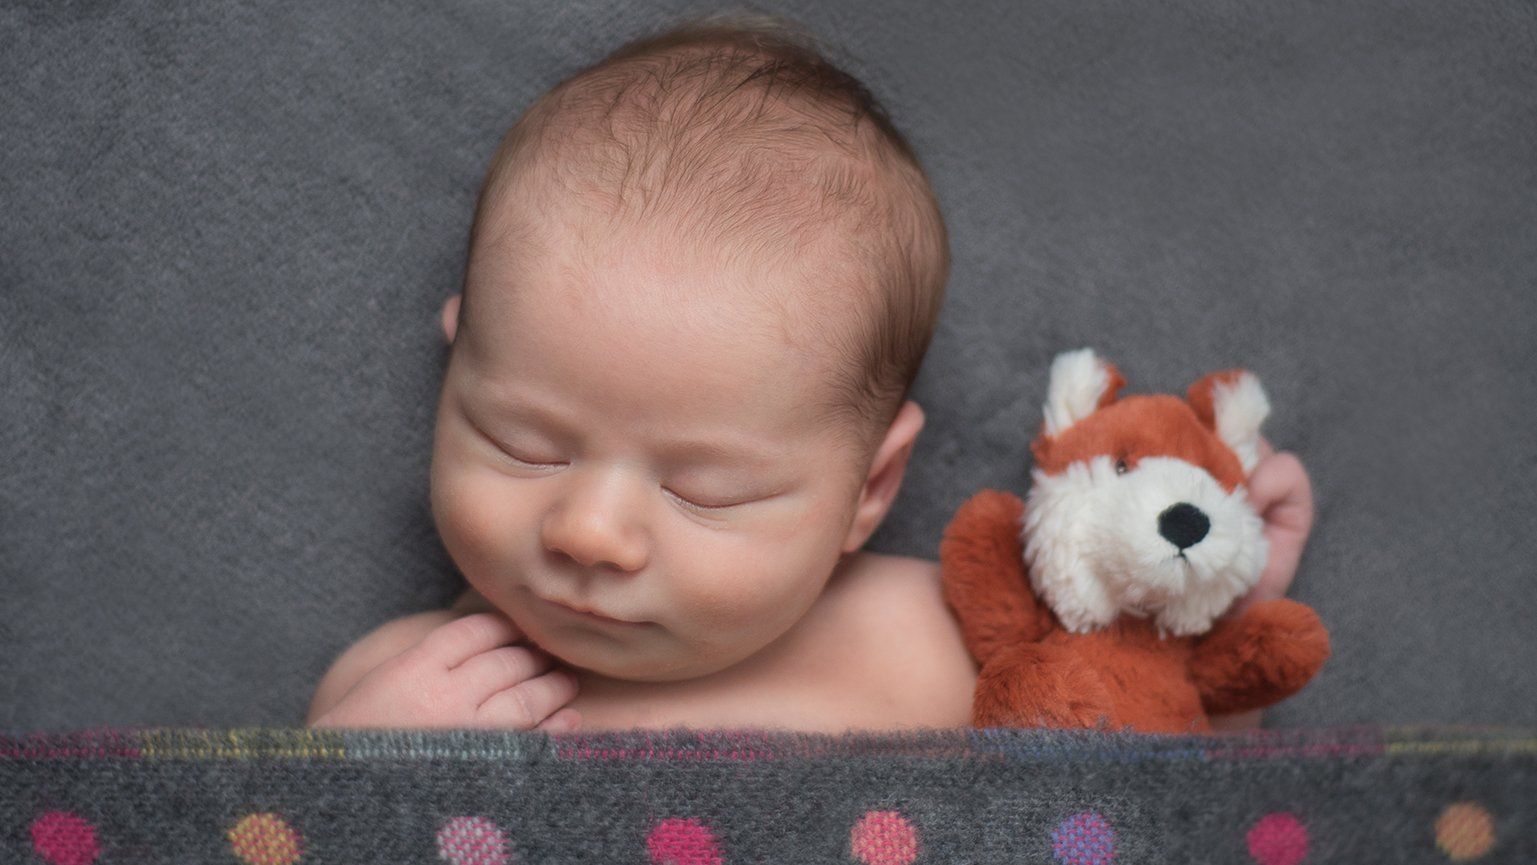 Newborn photoshoot baby on spotted blanket holding little fox toy